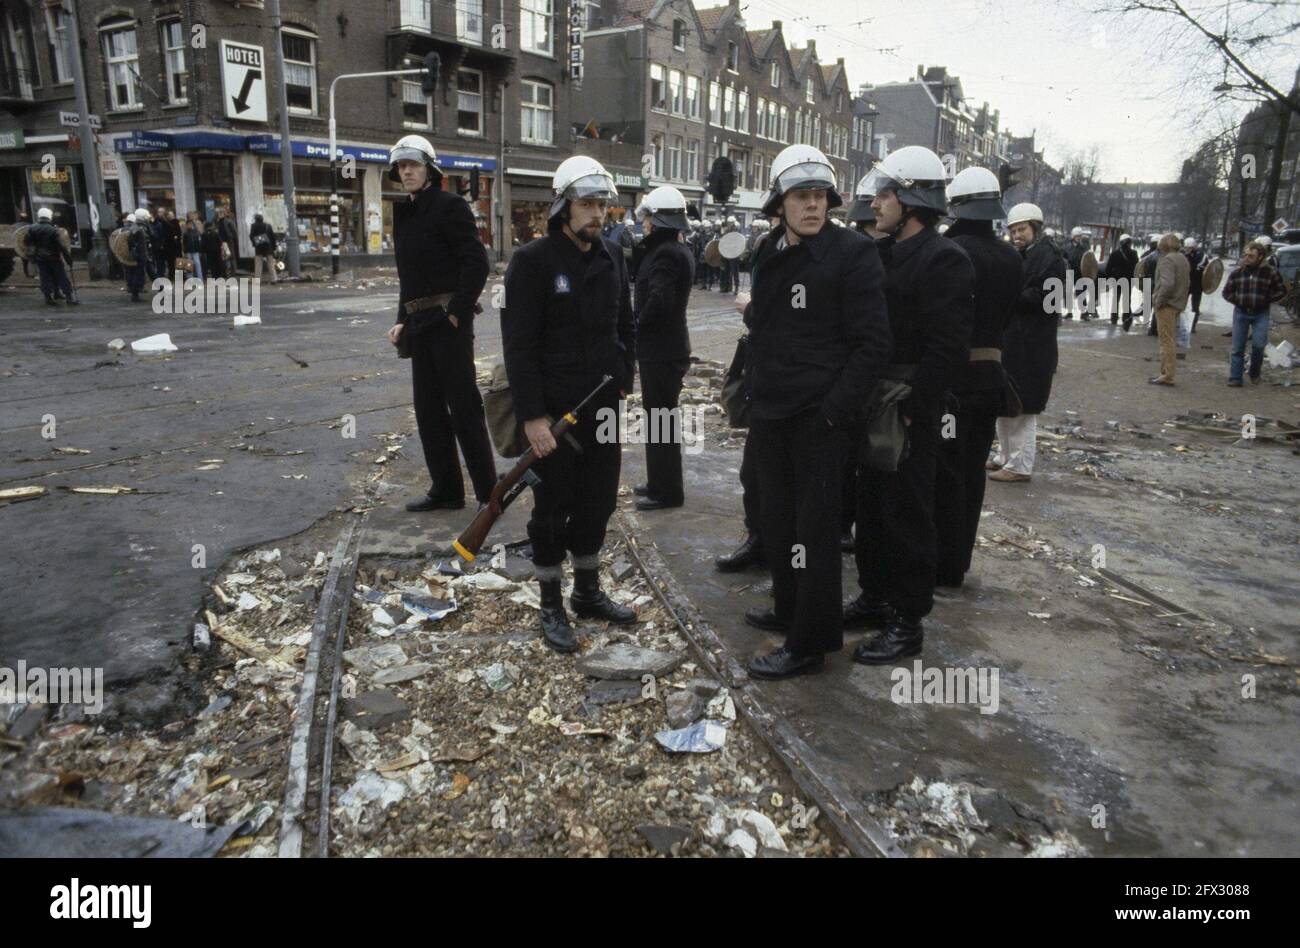 ME, tanks and armored serv. clear barricades around squat in Vondelbuurt Adam; ME on Overtoom and Rijkspolitie with carbine, February 1980, Mobile Unit, TANKS, squats, The Netherlands, 20th century press agency photo, news to remember, documentary, historic photography 1945-1990, visual stories, human history of the Twentieth Century, capturing moments in time Stock Photo